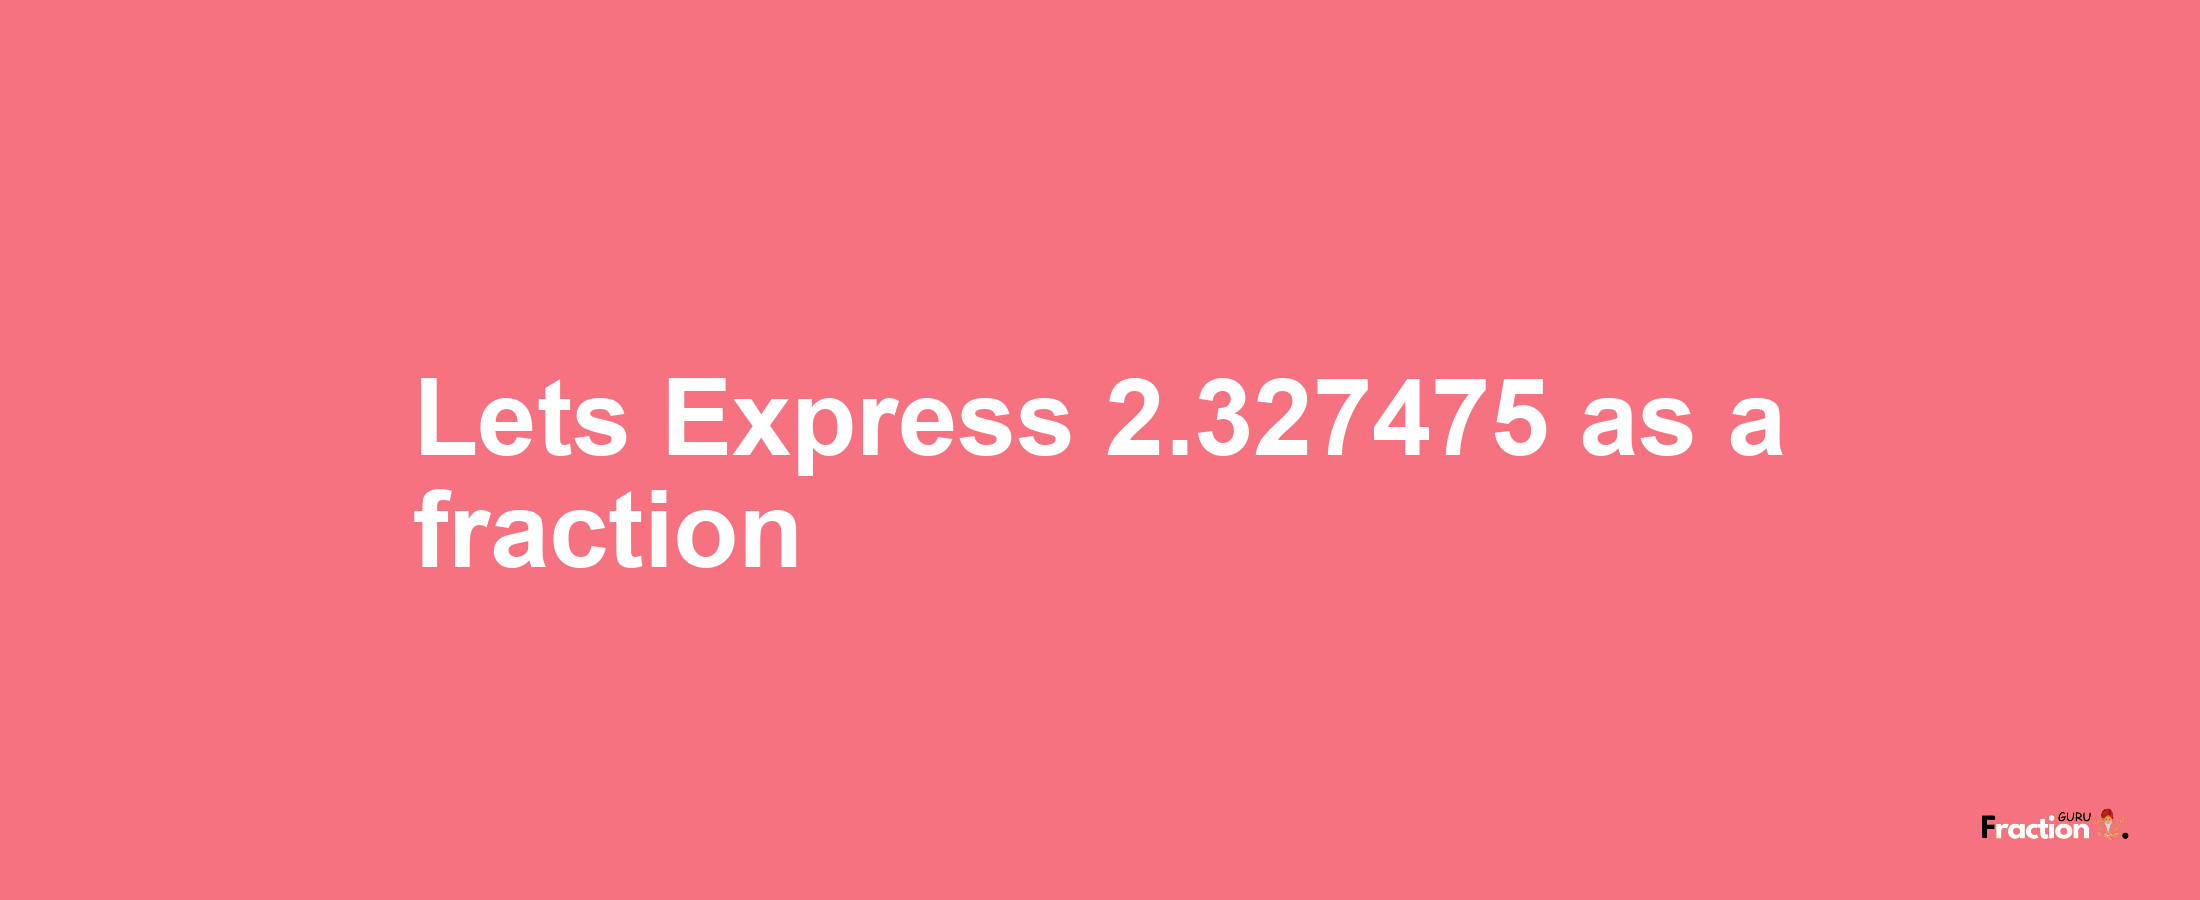 Lets Express 2.327475 as afraction